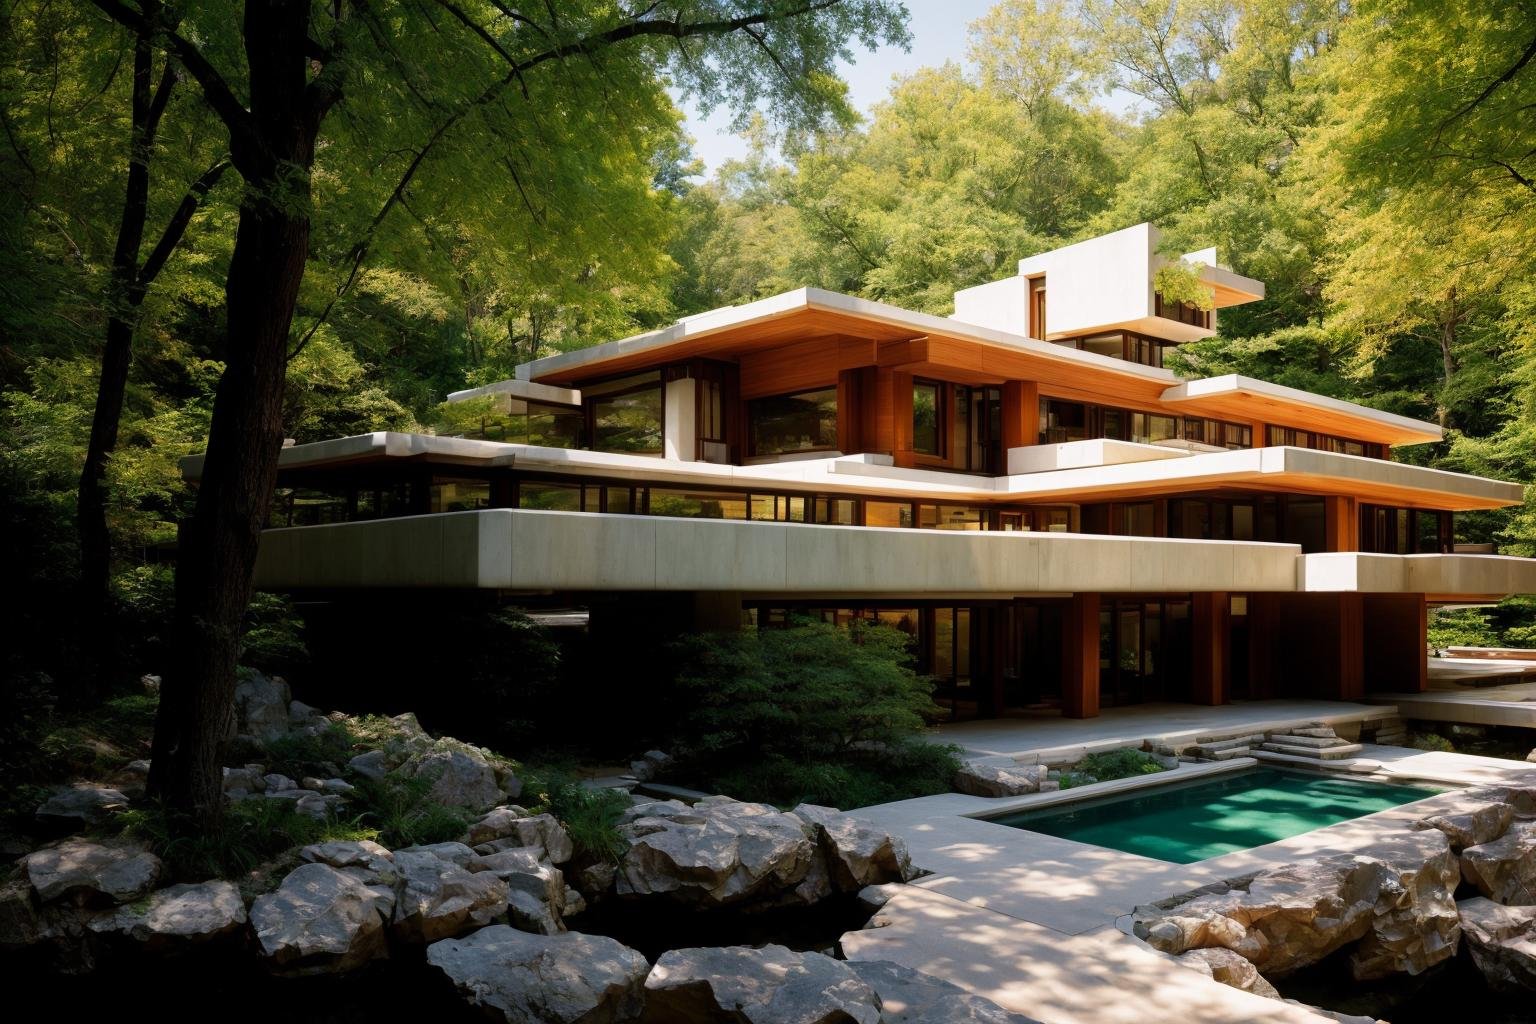 Dive into the world of Photography that captures the essence of Frank Lloyd Wright's modern "Frank Lloyd Wright's modern style villa" with a focus on the architectural marvel of Fallingwater. Through a 35mm lens, witness the structure in intense clarity and sharpness. The image has a warm color temperature that highlights the building's iconic cascading forms. No facial expressions are present as the image focuses solely on architecture. The lighting is natural, with the sun casting soft shadows on the structure, giving depth and texture. The atmosphere feels serene and untouched by time